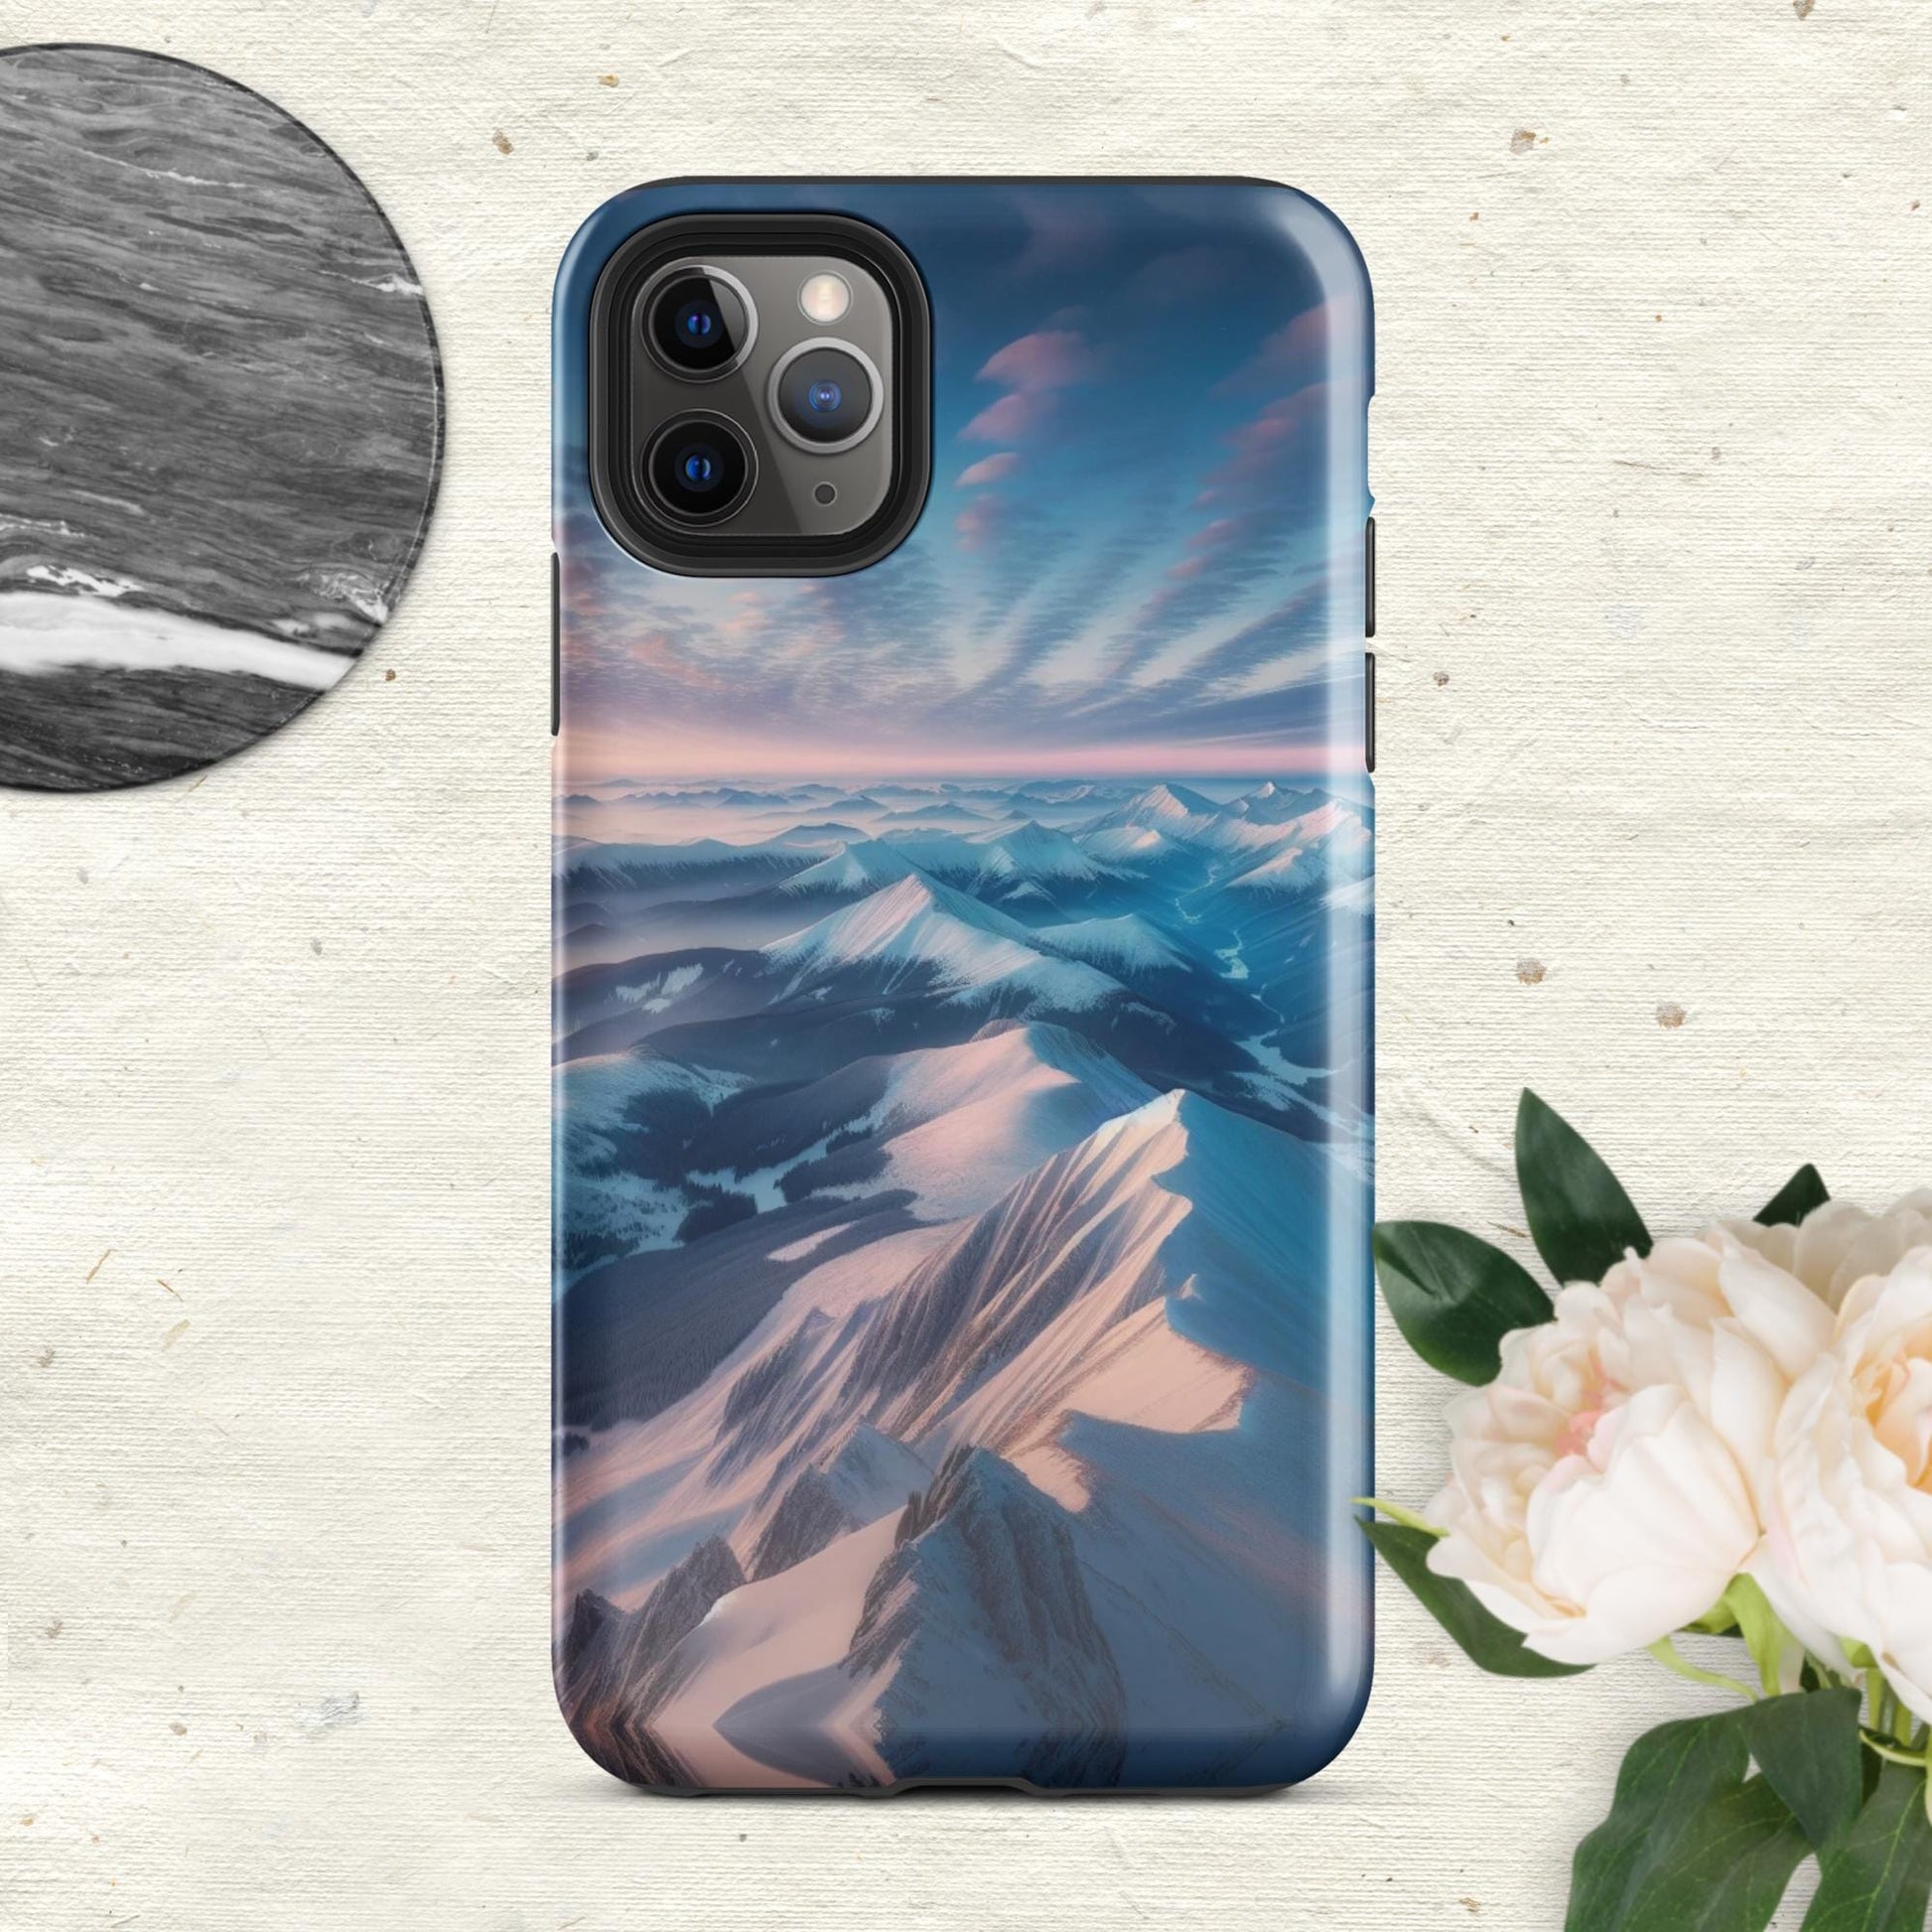 The Hologram Hook Up Glossy / iPhone 11 Pro Max White Range Tough Case for iPhone®